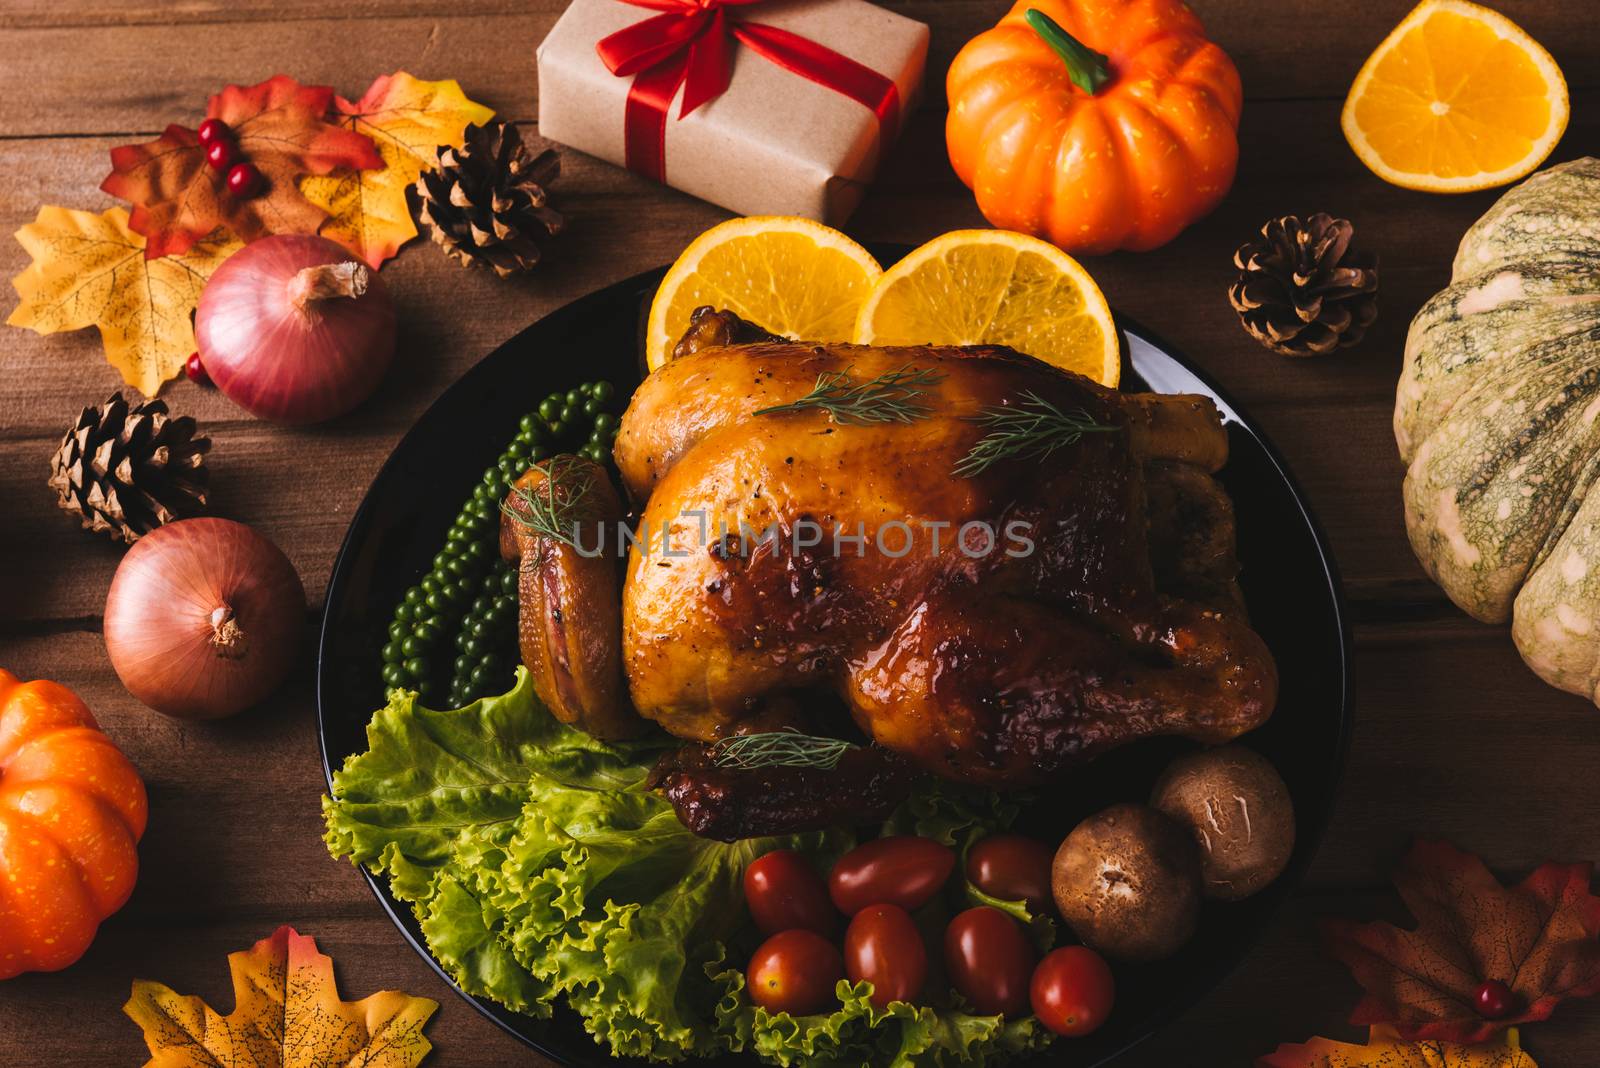 Thanksgiving roast turkey or chicken and vegetables, Top view Christmas dinner feast food decoration traditional homemade on wooden table background, Happy thanksgiving day of holiday concept